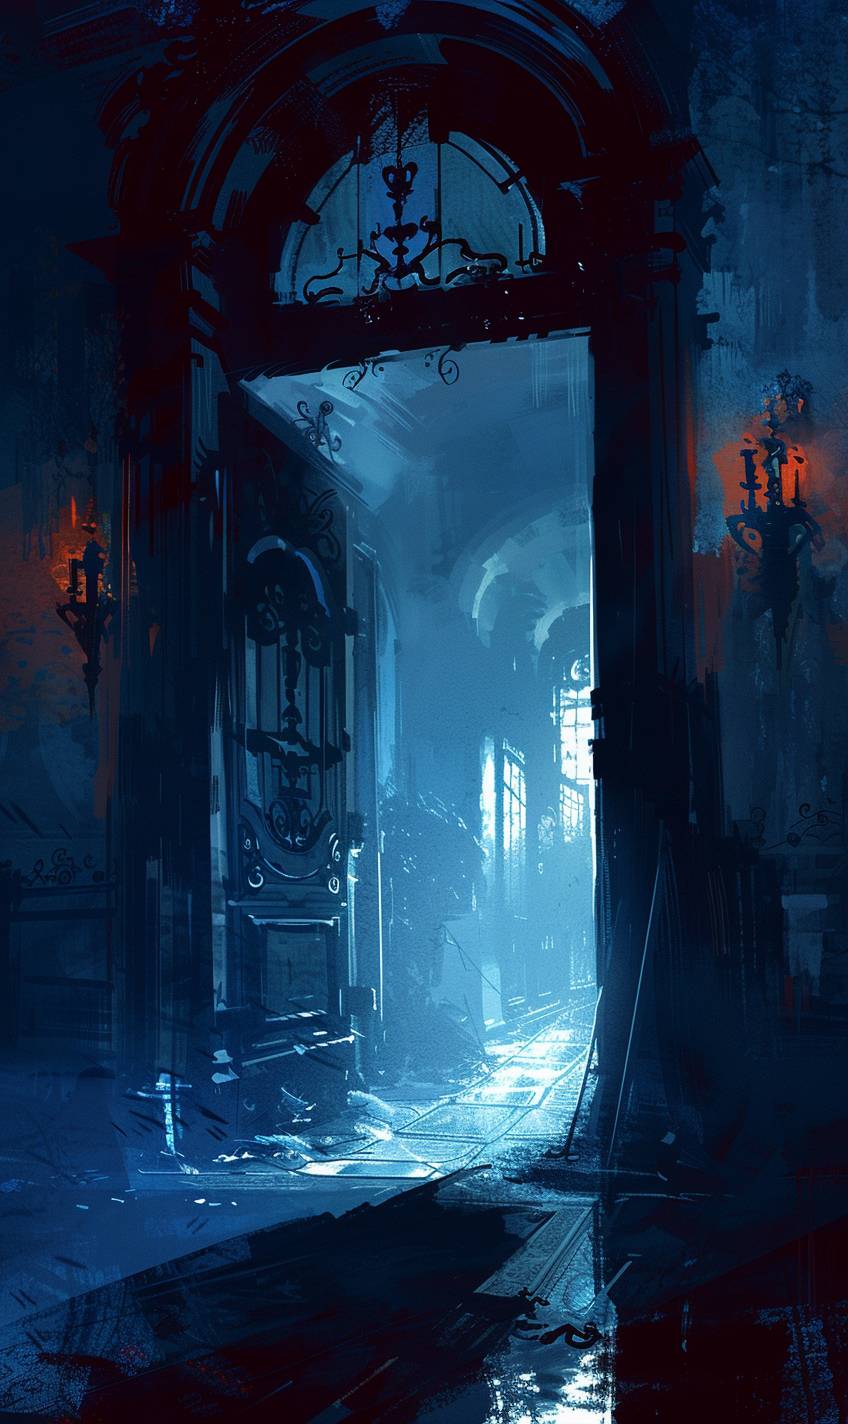 In the style of sparth, a haunted mansion with creaking doors and shadows